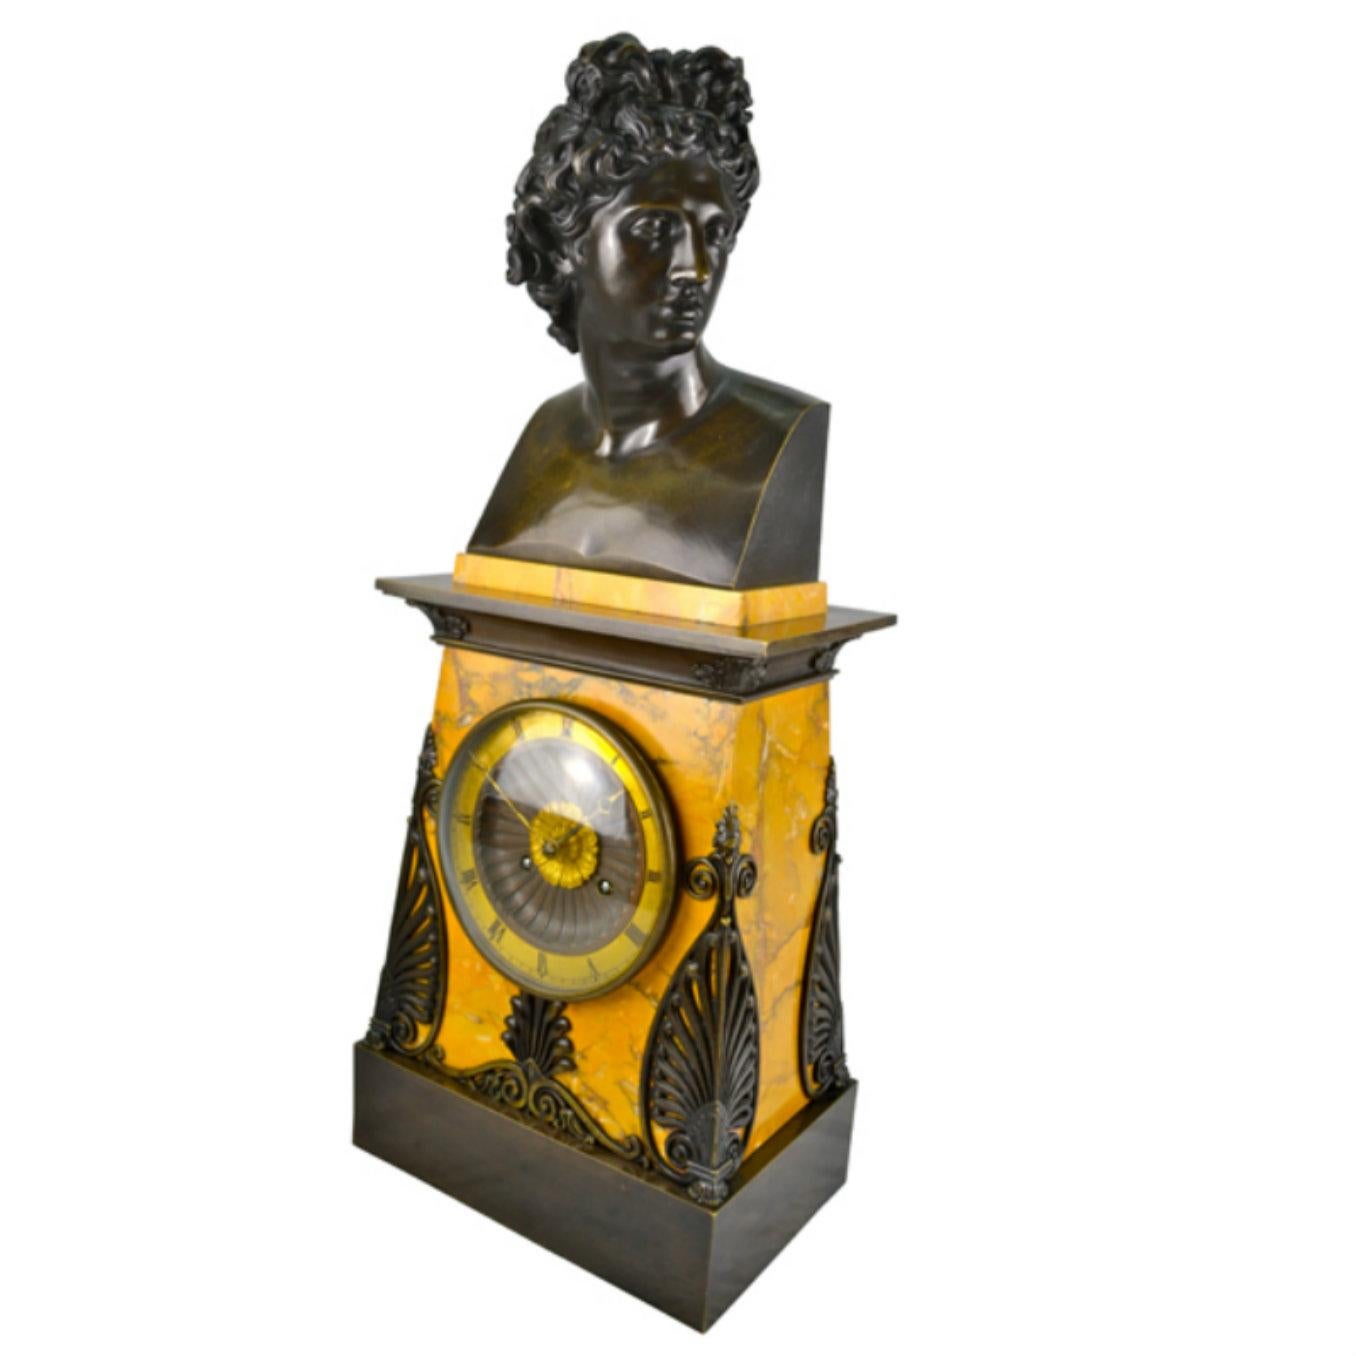   Empire Bronze and Sienna Marble Clock with a bust of Apollo Belvedere In Good Condition For Sale In Vancouver, British Columbia